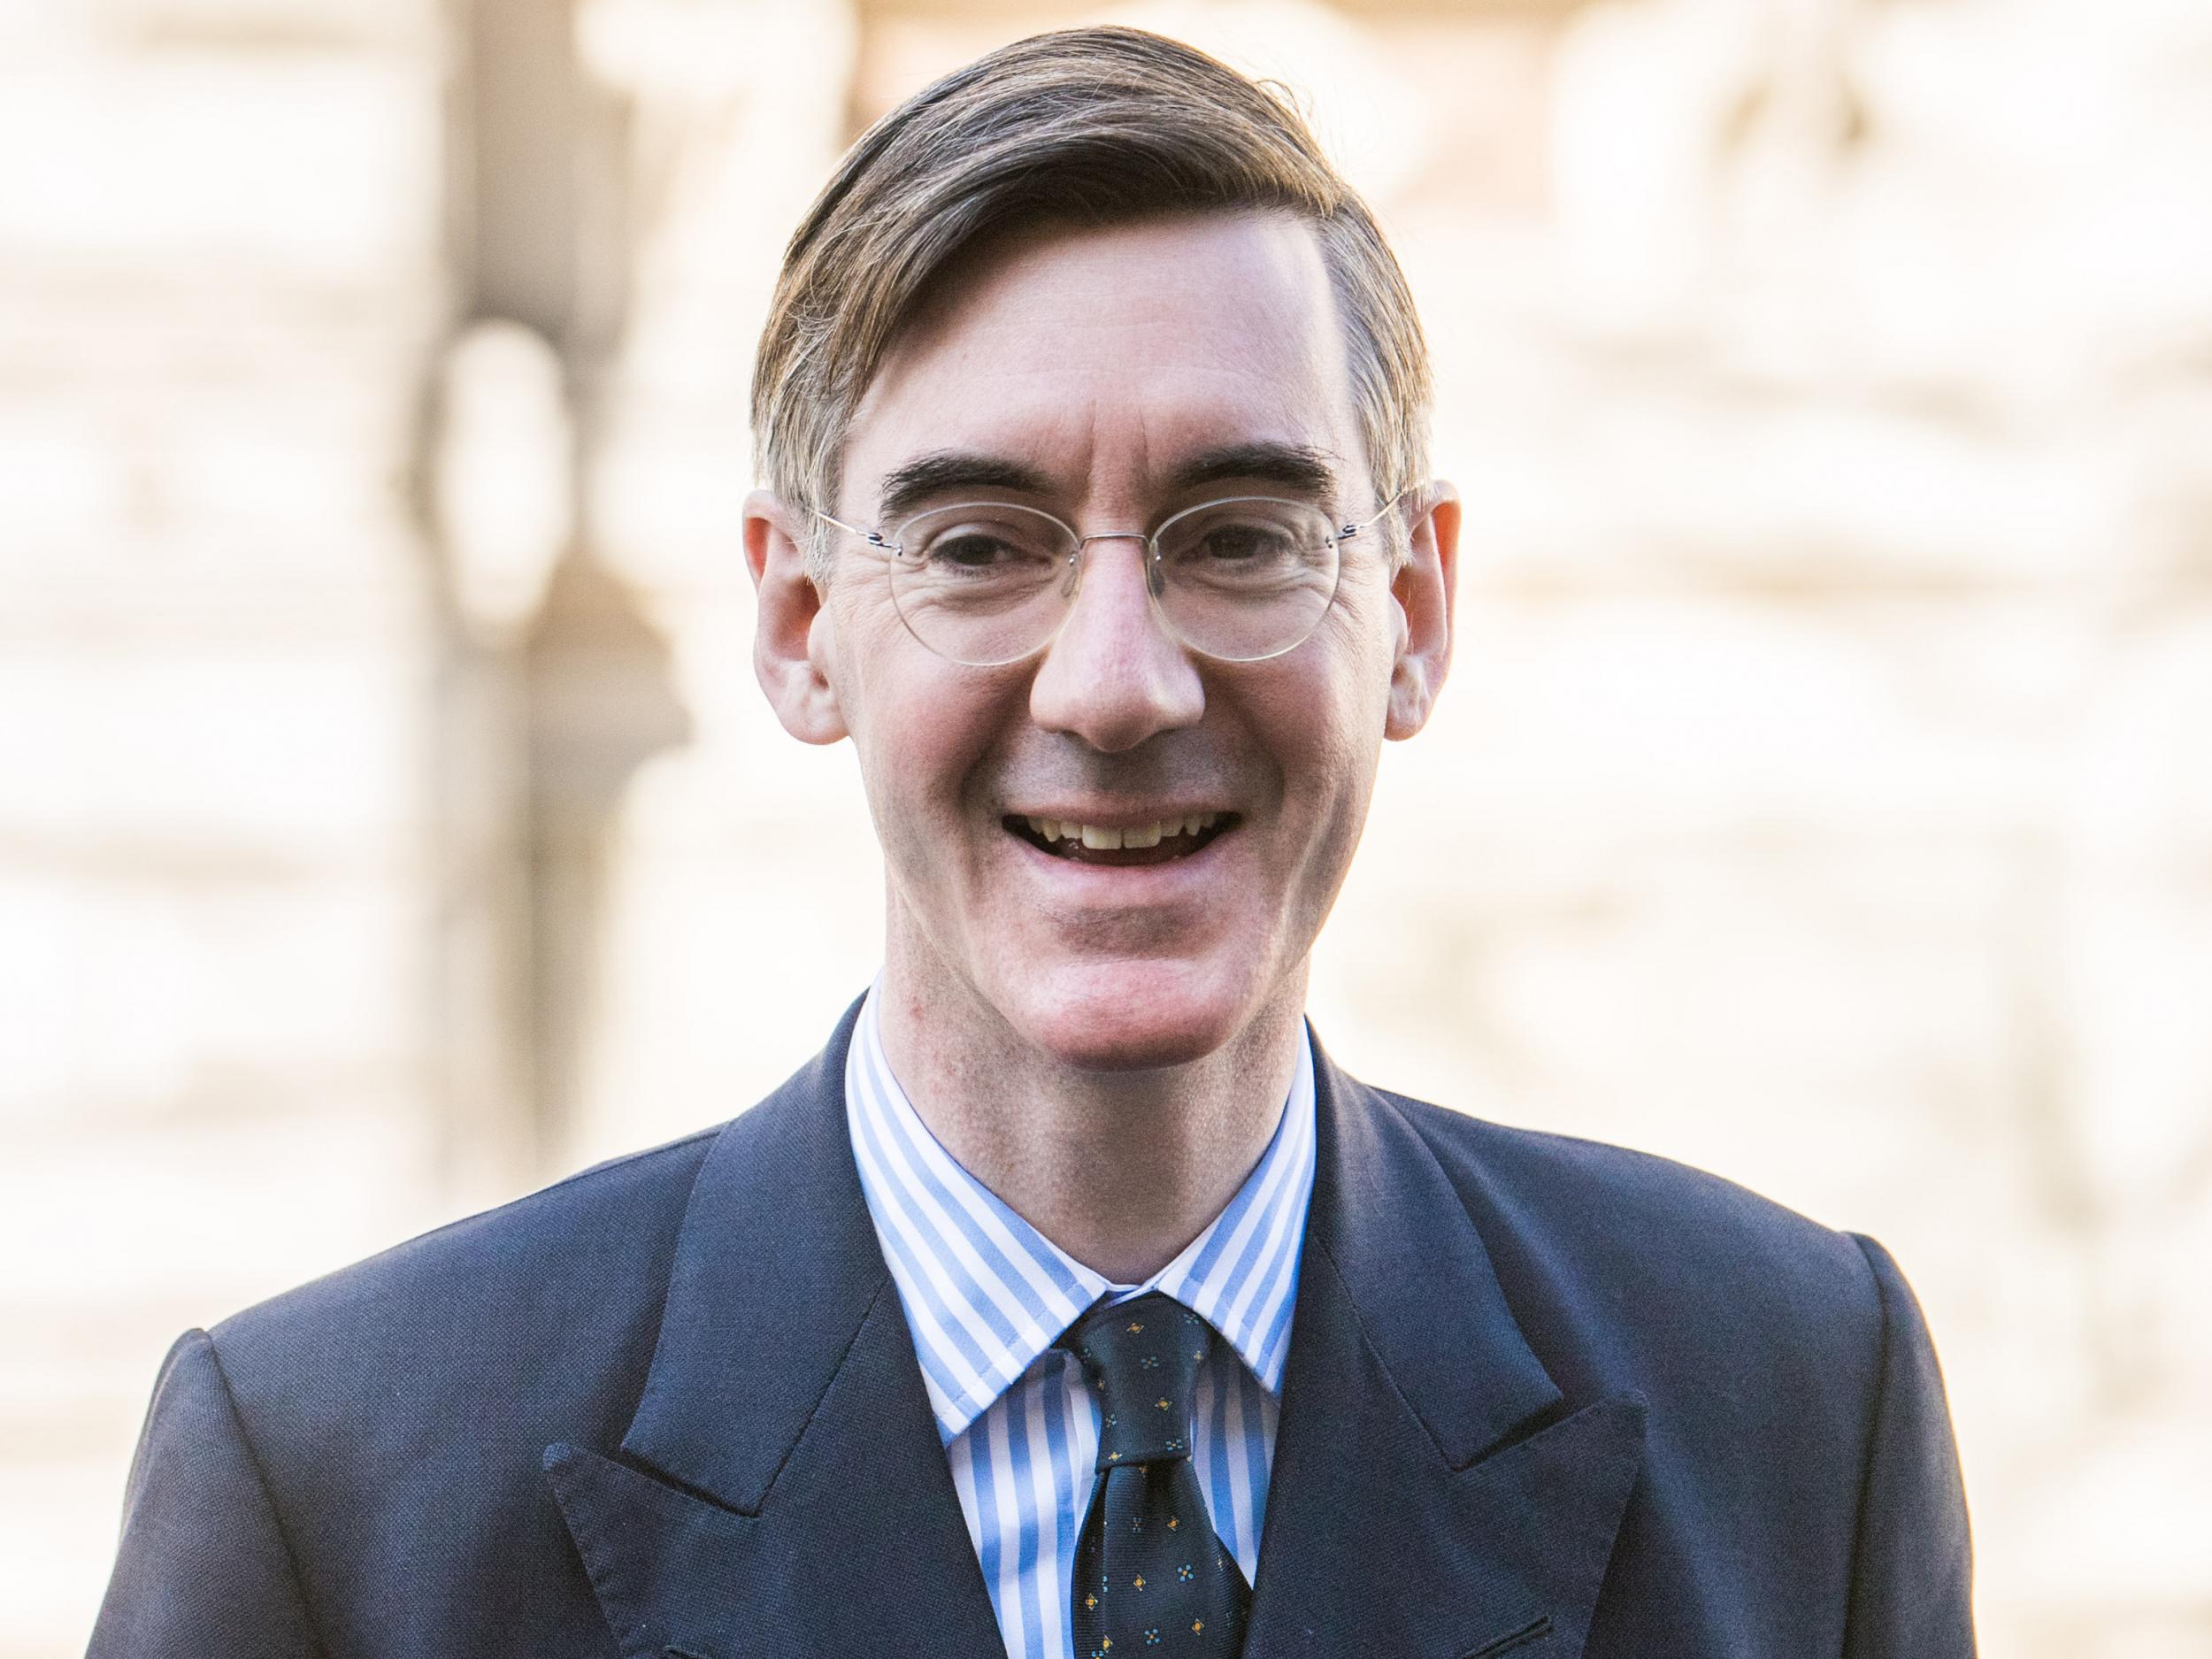 Jacob Rees-Mogg is simply warming up to say that Europe didn’t give us what we wanted, even though nobody told them what this was